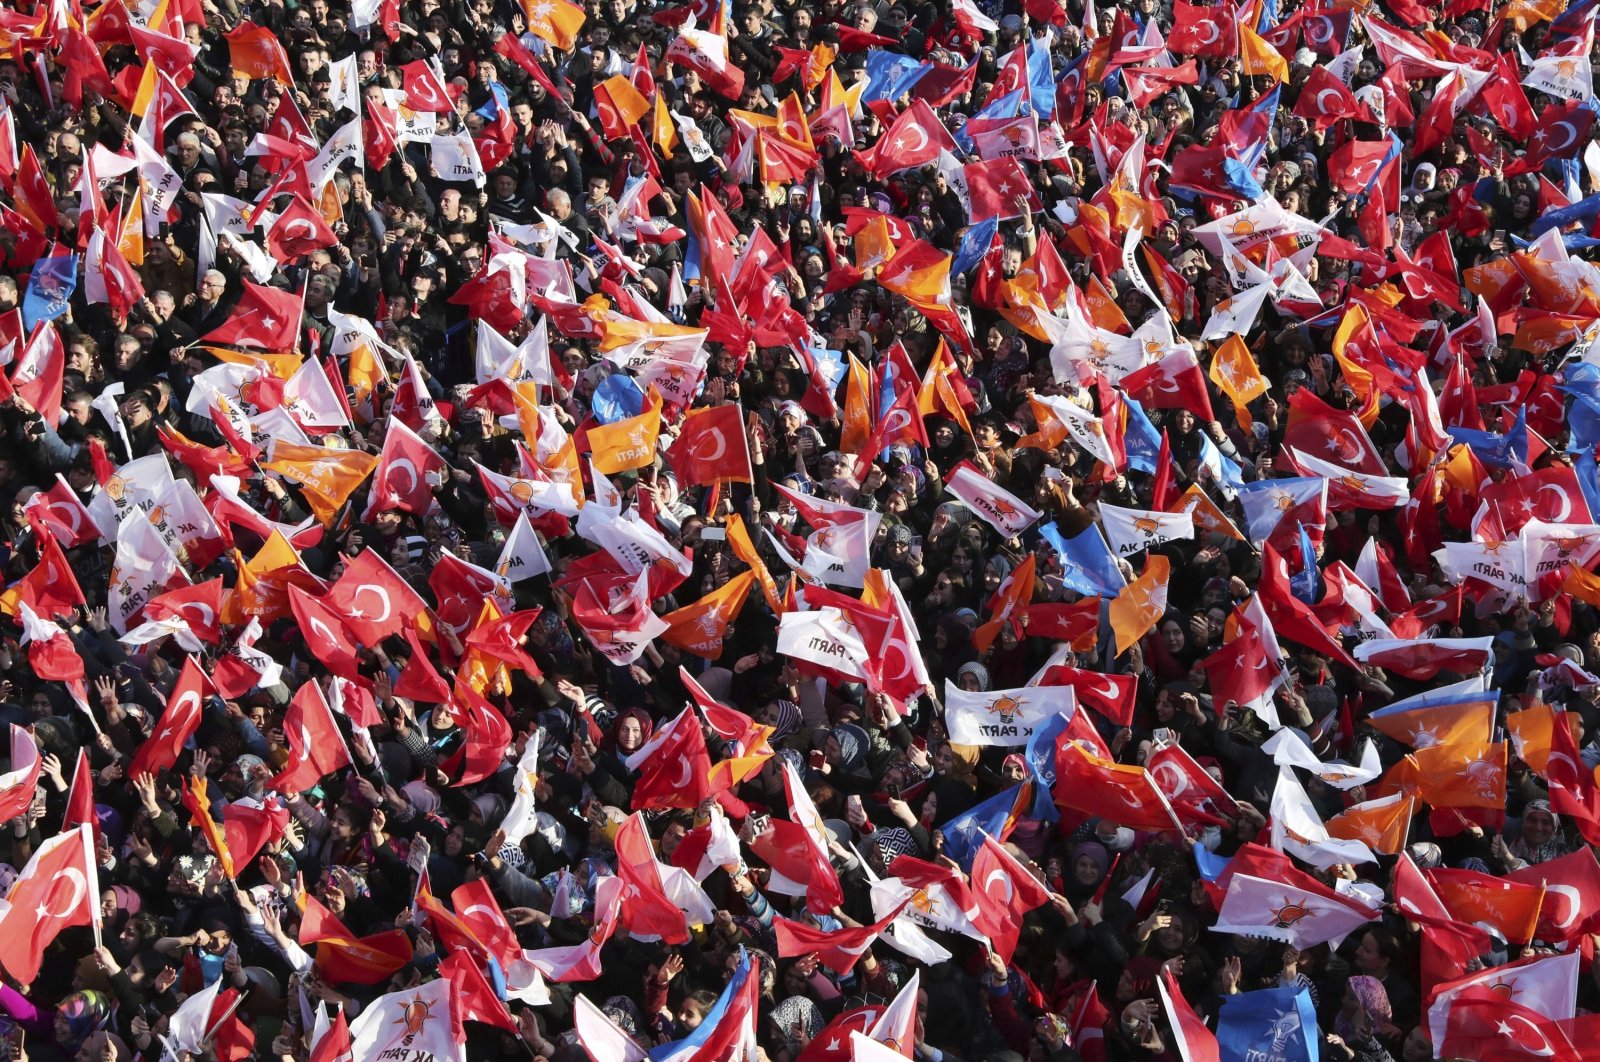 Supporters of the ruling Justice and Development Party (AK Party) wave Turkish and party flags during a rally in Bartın, Turkey, March 4, 2019. (AP Photo)